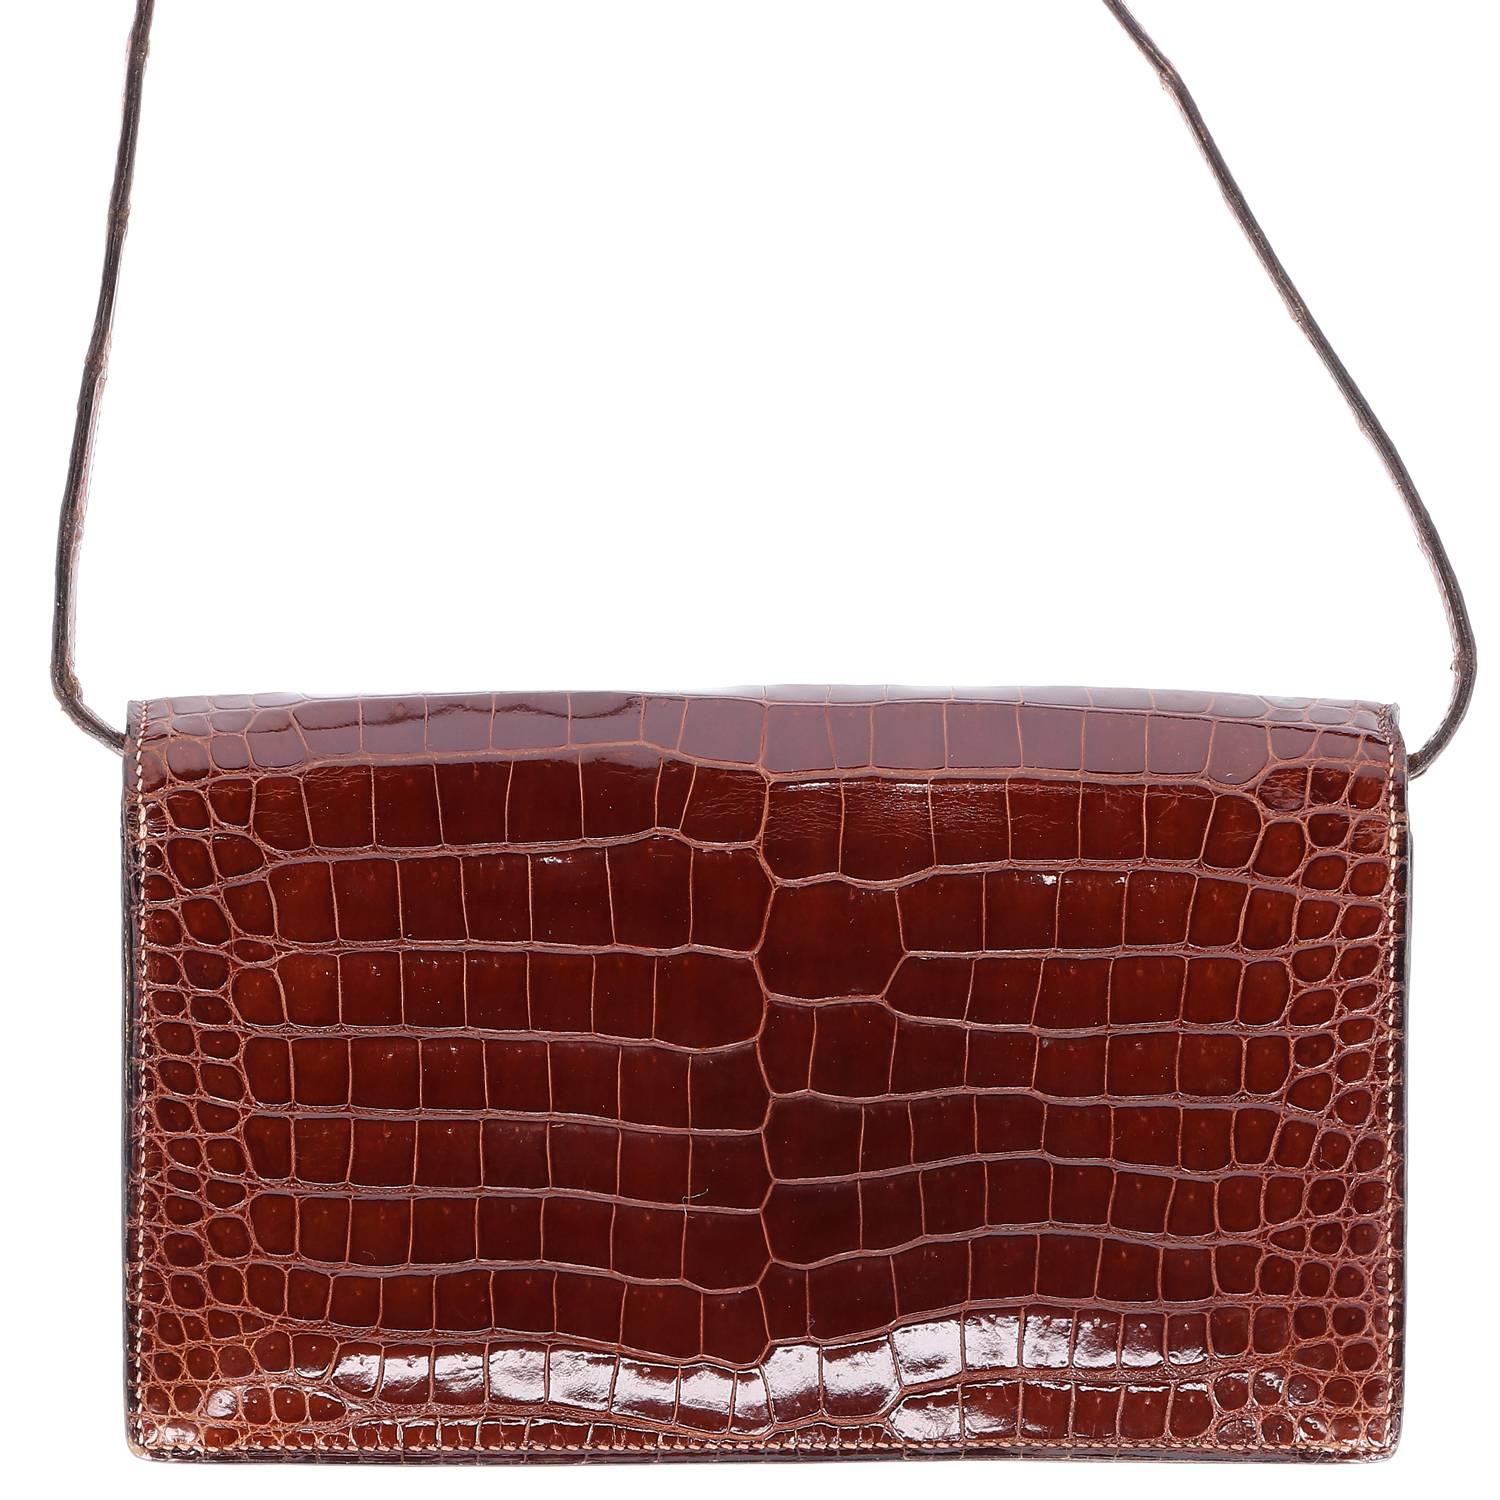 This stunning Hermès vintage crossbody is a jewel made of polished crocodile leather. Dating back to the 1970s, it shows its (B) code (as shown in picture) and has an extraordinary 